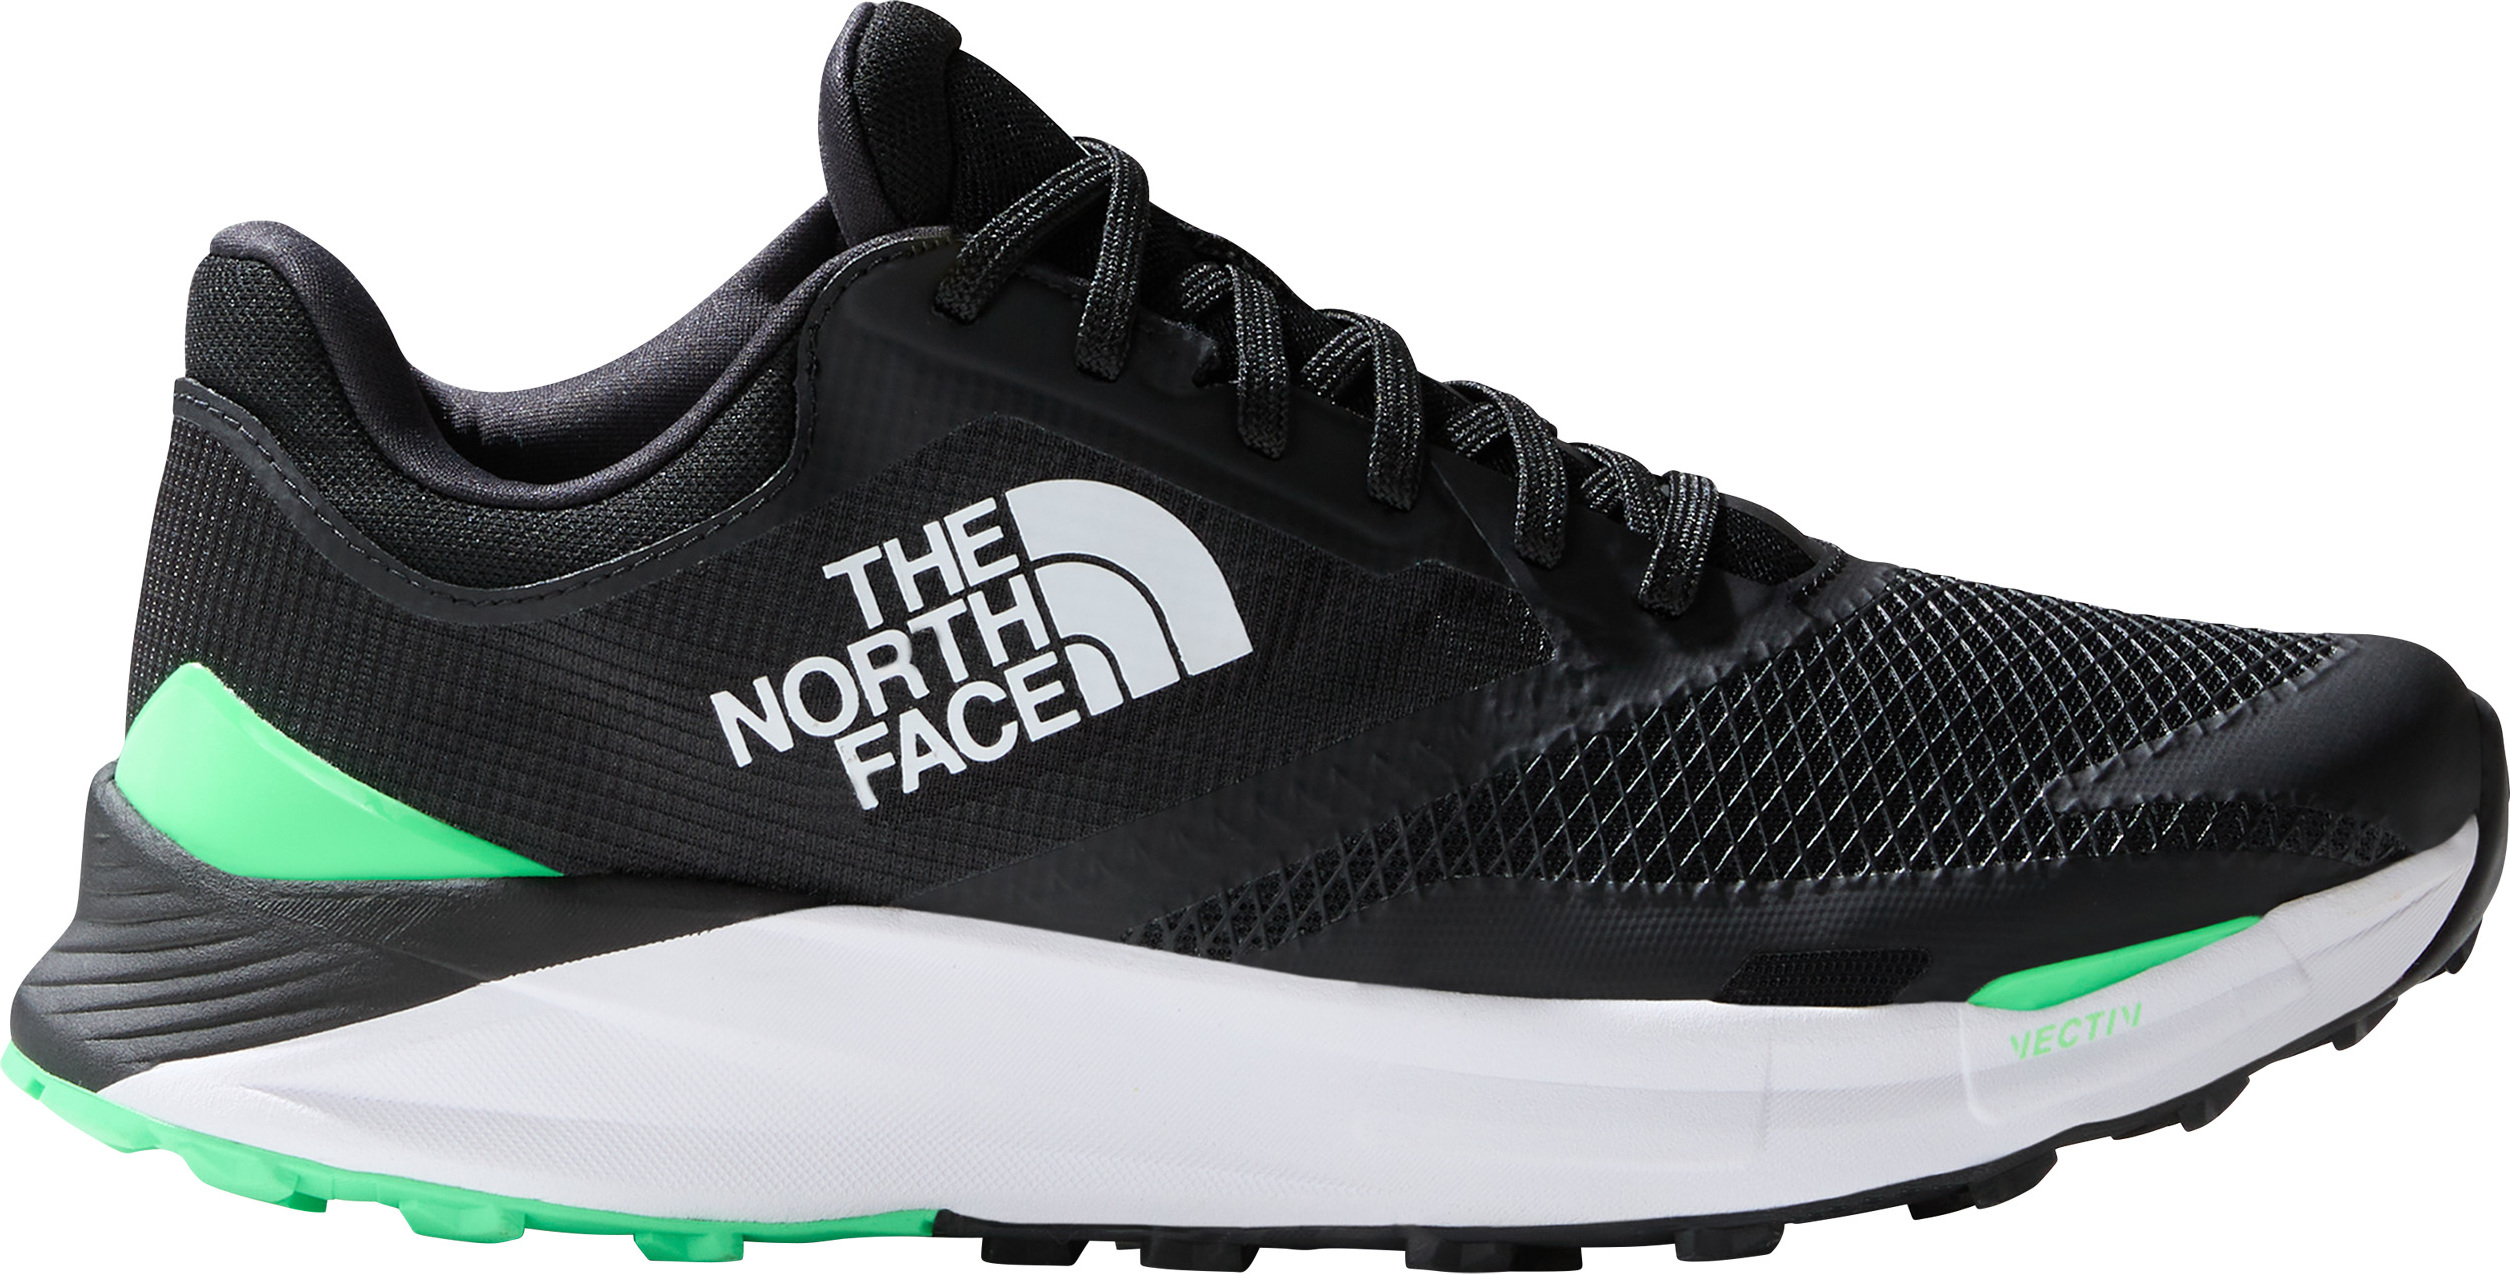 The North Face The North Face M VECTIV ENDURIS 3 TNF Black/Chlorophyll Green 40.5, TNF BLACK/CHLOROPHYLL GRN